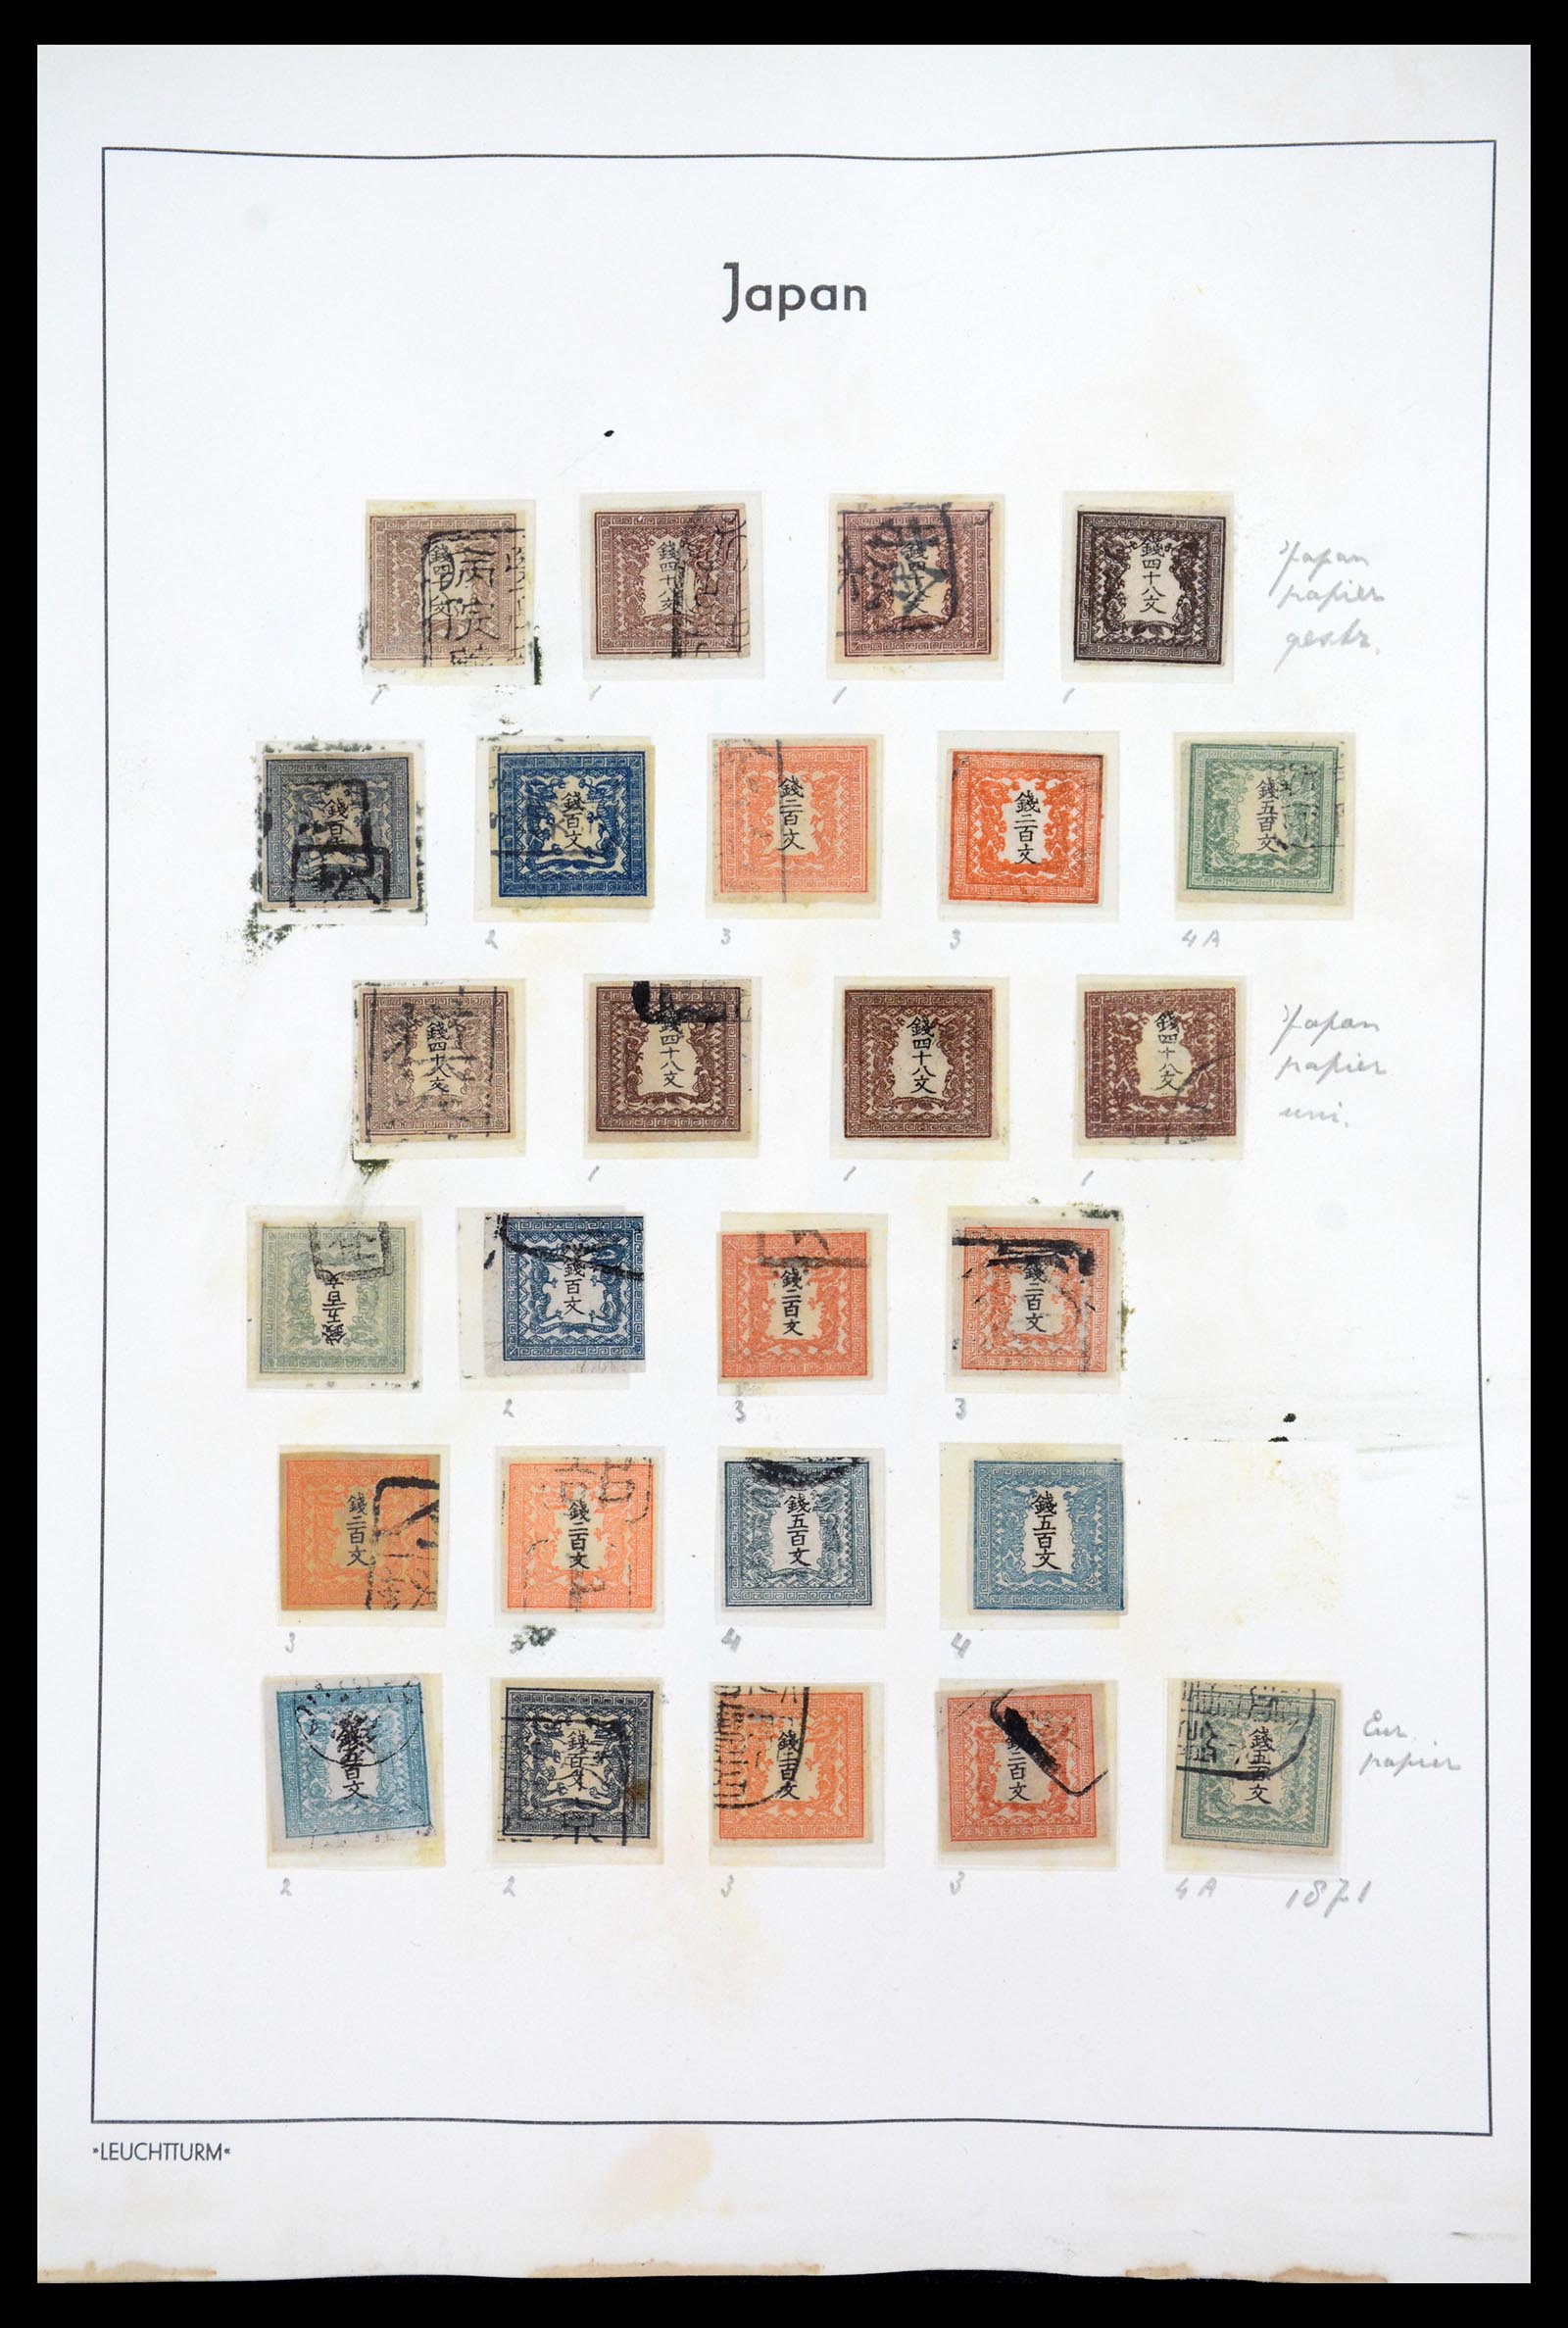 36755 001 - Stamp collection 36755 Japan supercollection 1871-1988.